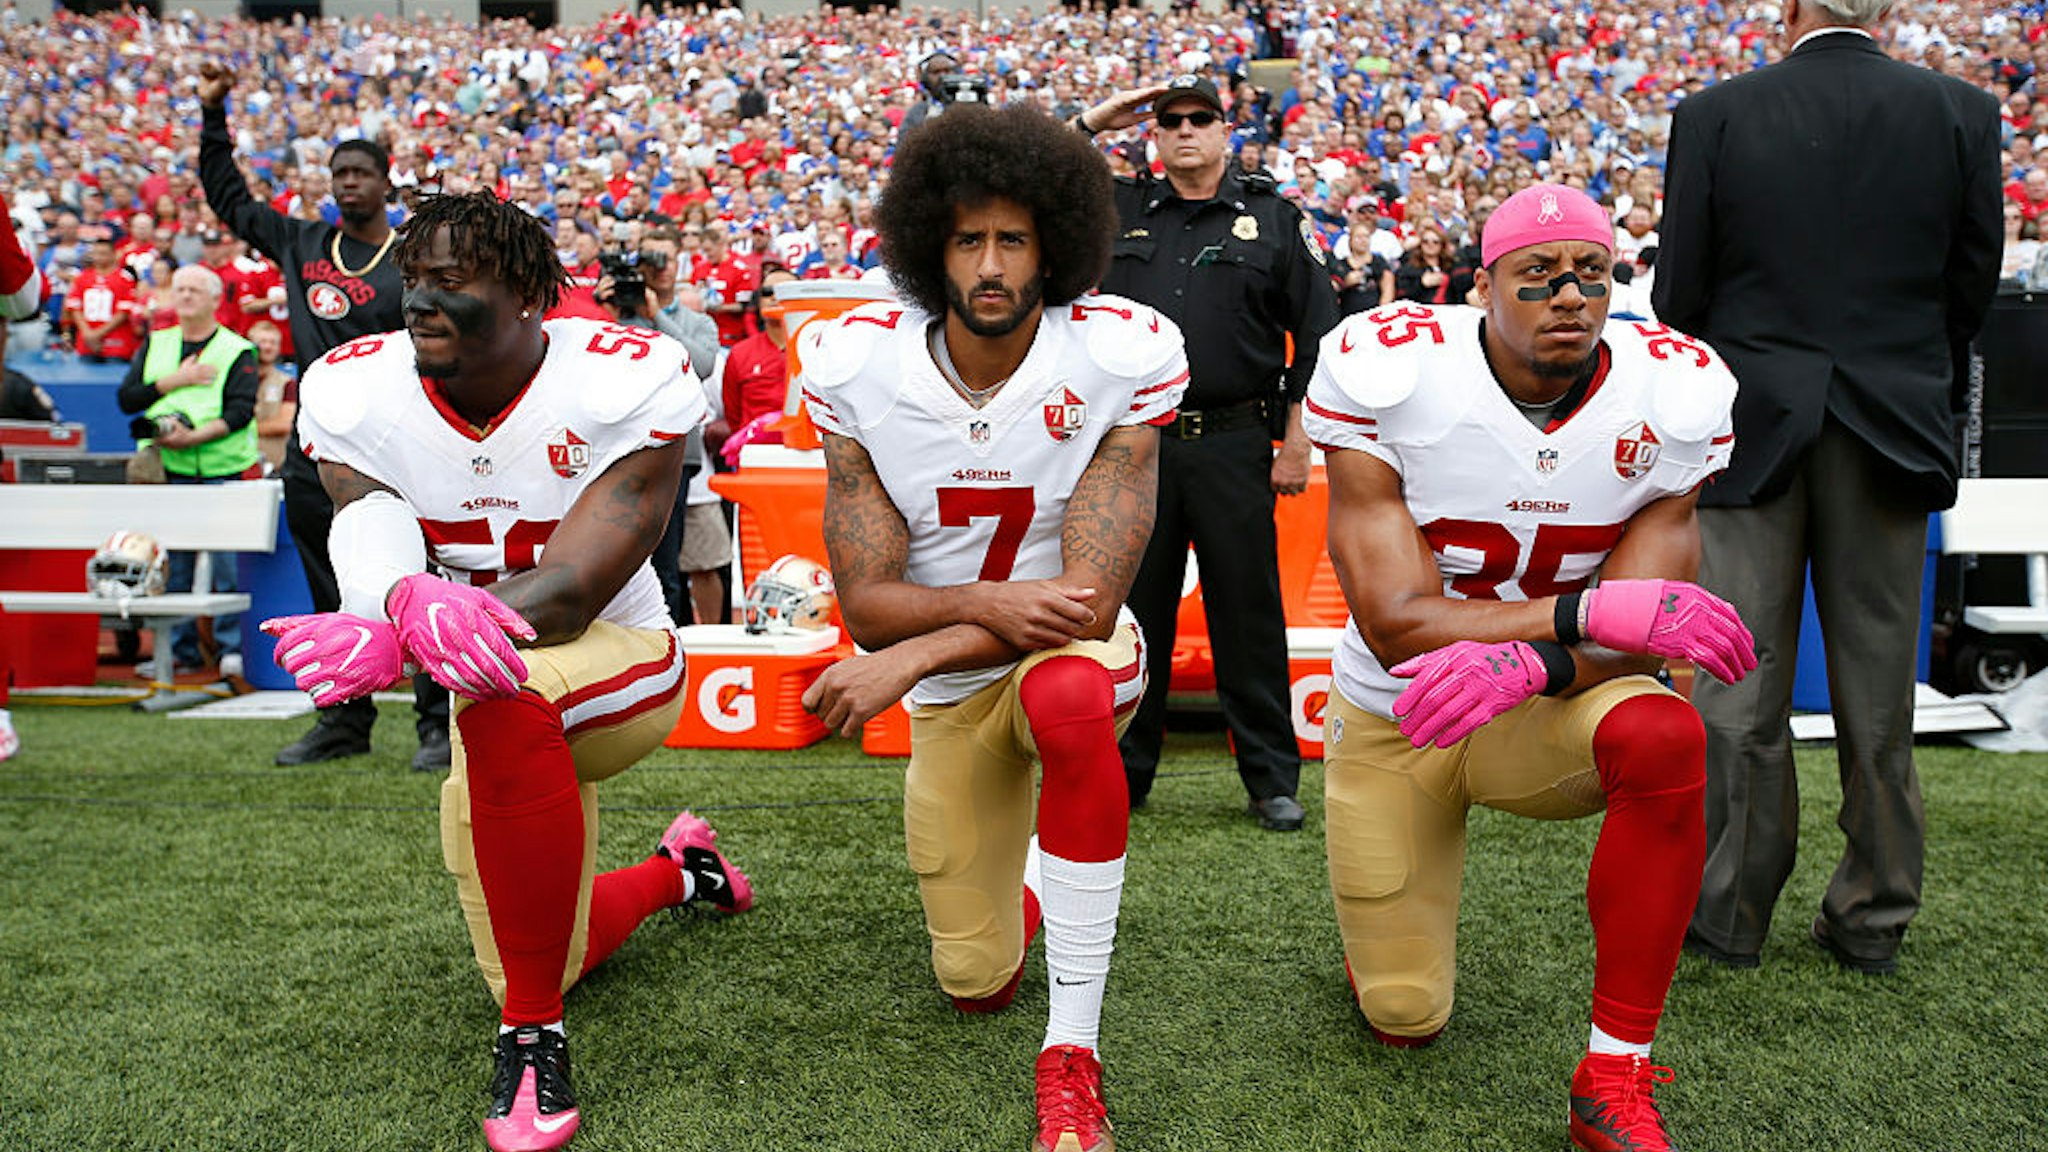 ORCHARD PARK, NY - OCTOBER 15: Eli Harold #58, Colin Kaepernick #7 and Eric Reid #35 of the San Francisco 49ers kneel in protest on the sideline, during the anthem, prior to the game against the Buffalo Bills at New Era Field on October 16, 2016 in Orchard Park, New York. The Bills defeated the 49ers 45-16. (Photo by Michael Zagaris/San Francisco 49ers/Getty Images)